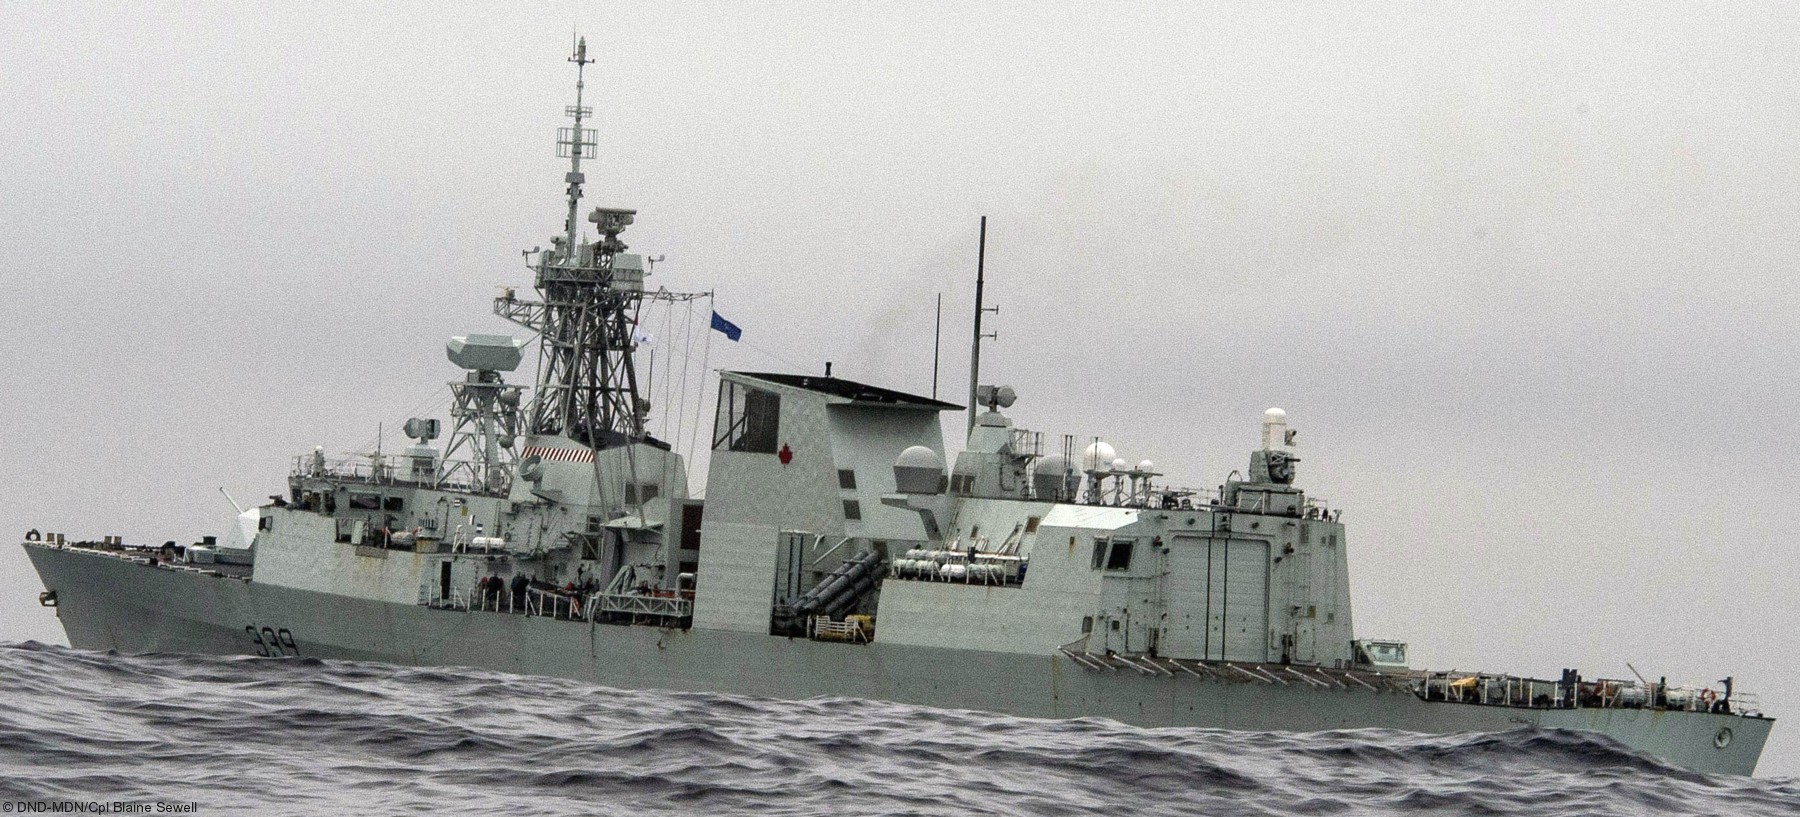 ffh-339 hmcs charlottetown halifax class helicopter patrol frigate ncsm royal canadian navy 24